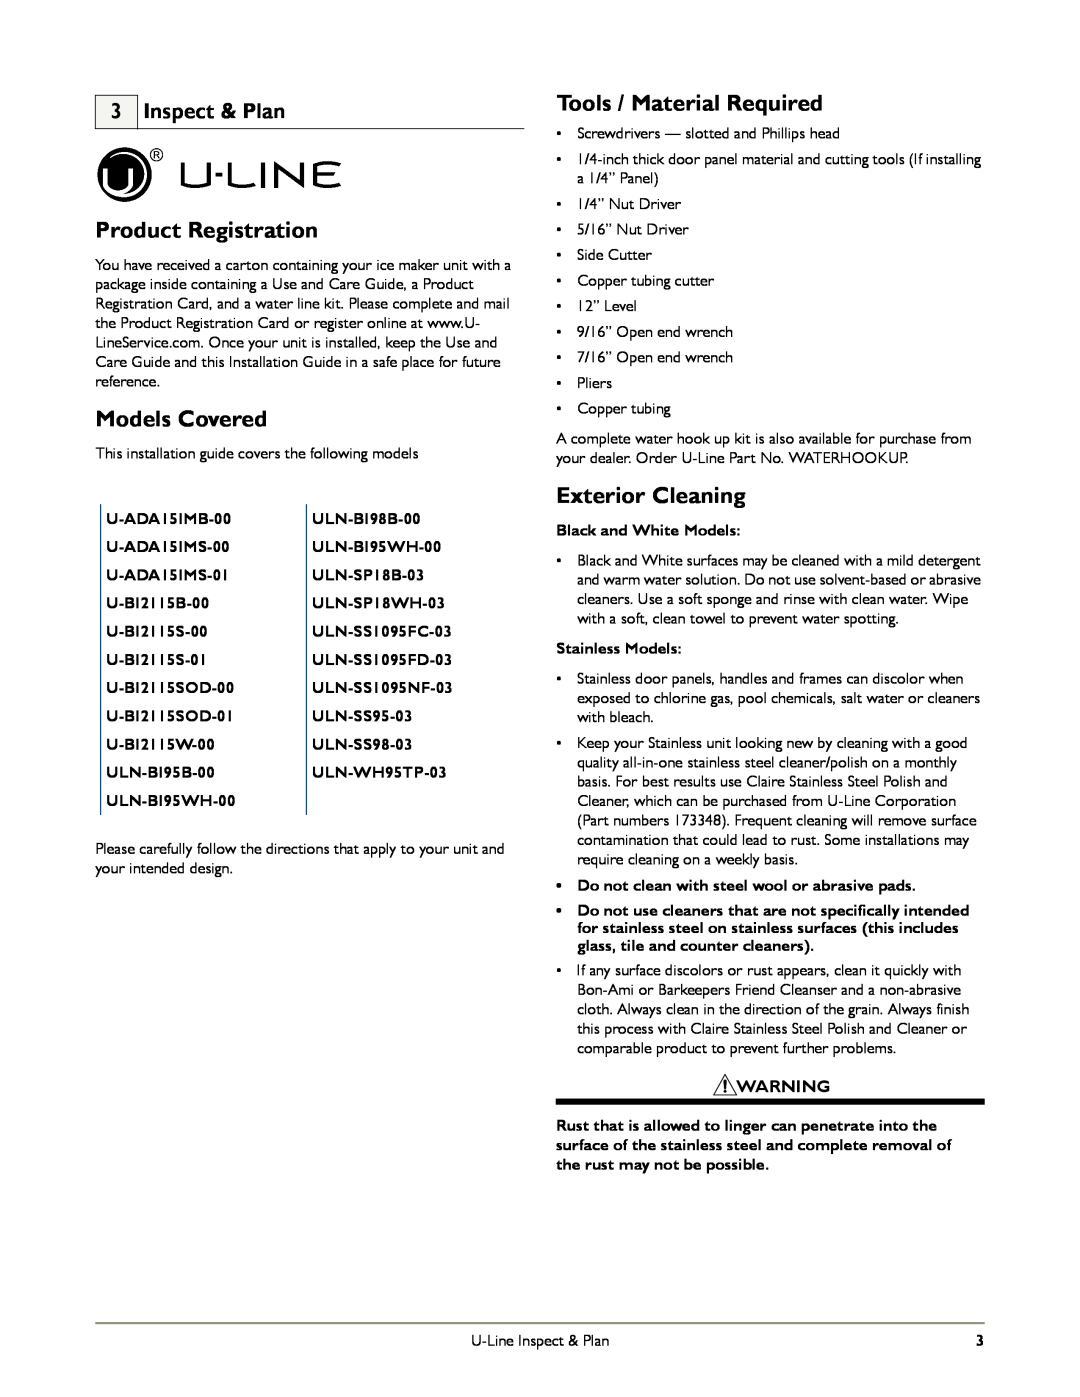 U-Line SS-98, B198, WH95 Product Registration, Models Covered, Tools / Material Required, Exterior Cleaning, Inspect & Plan 